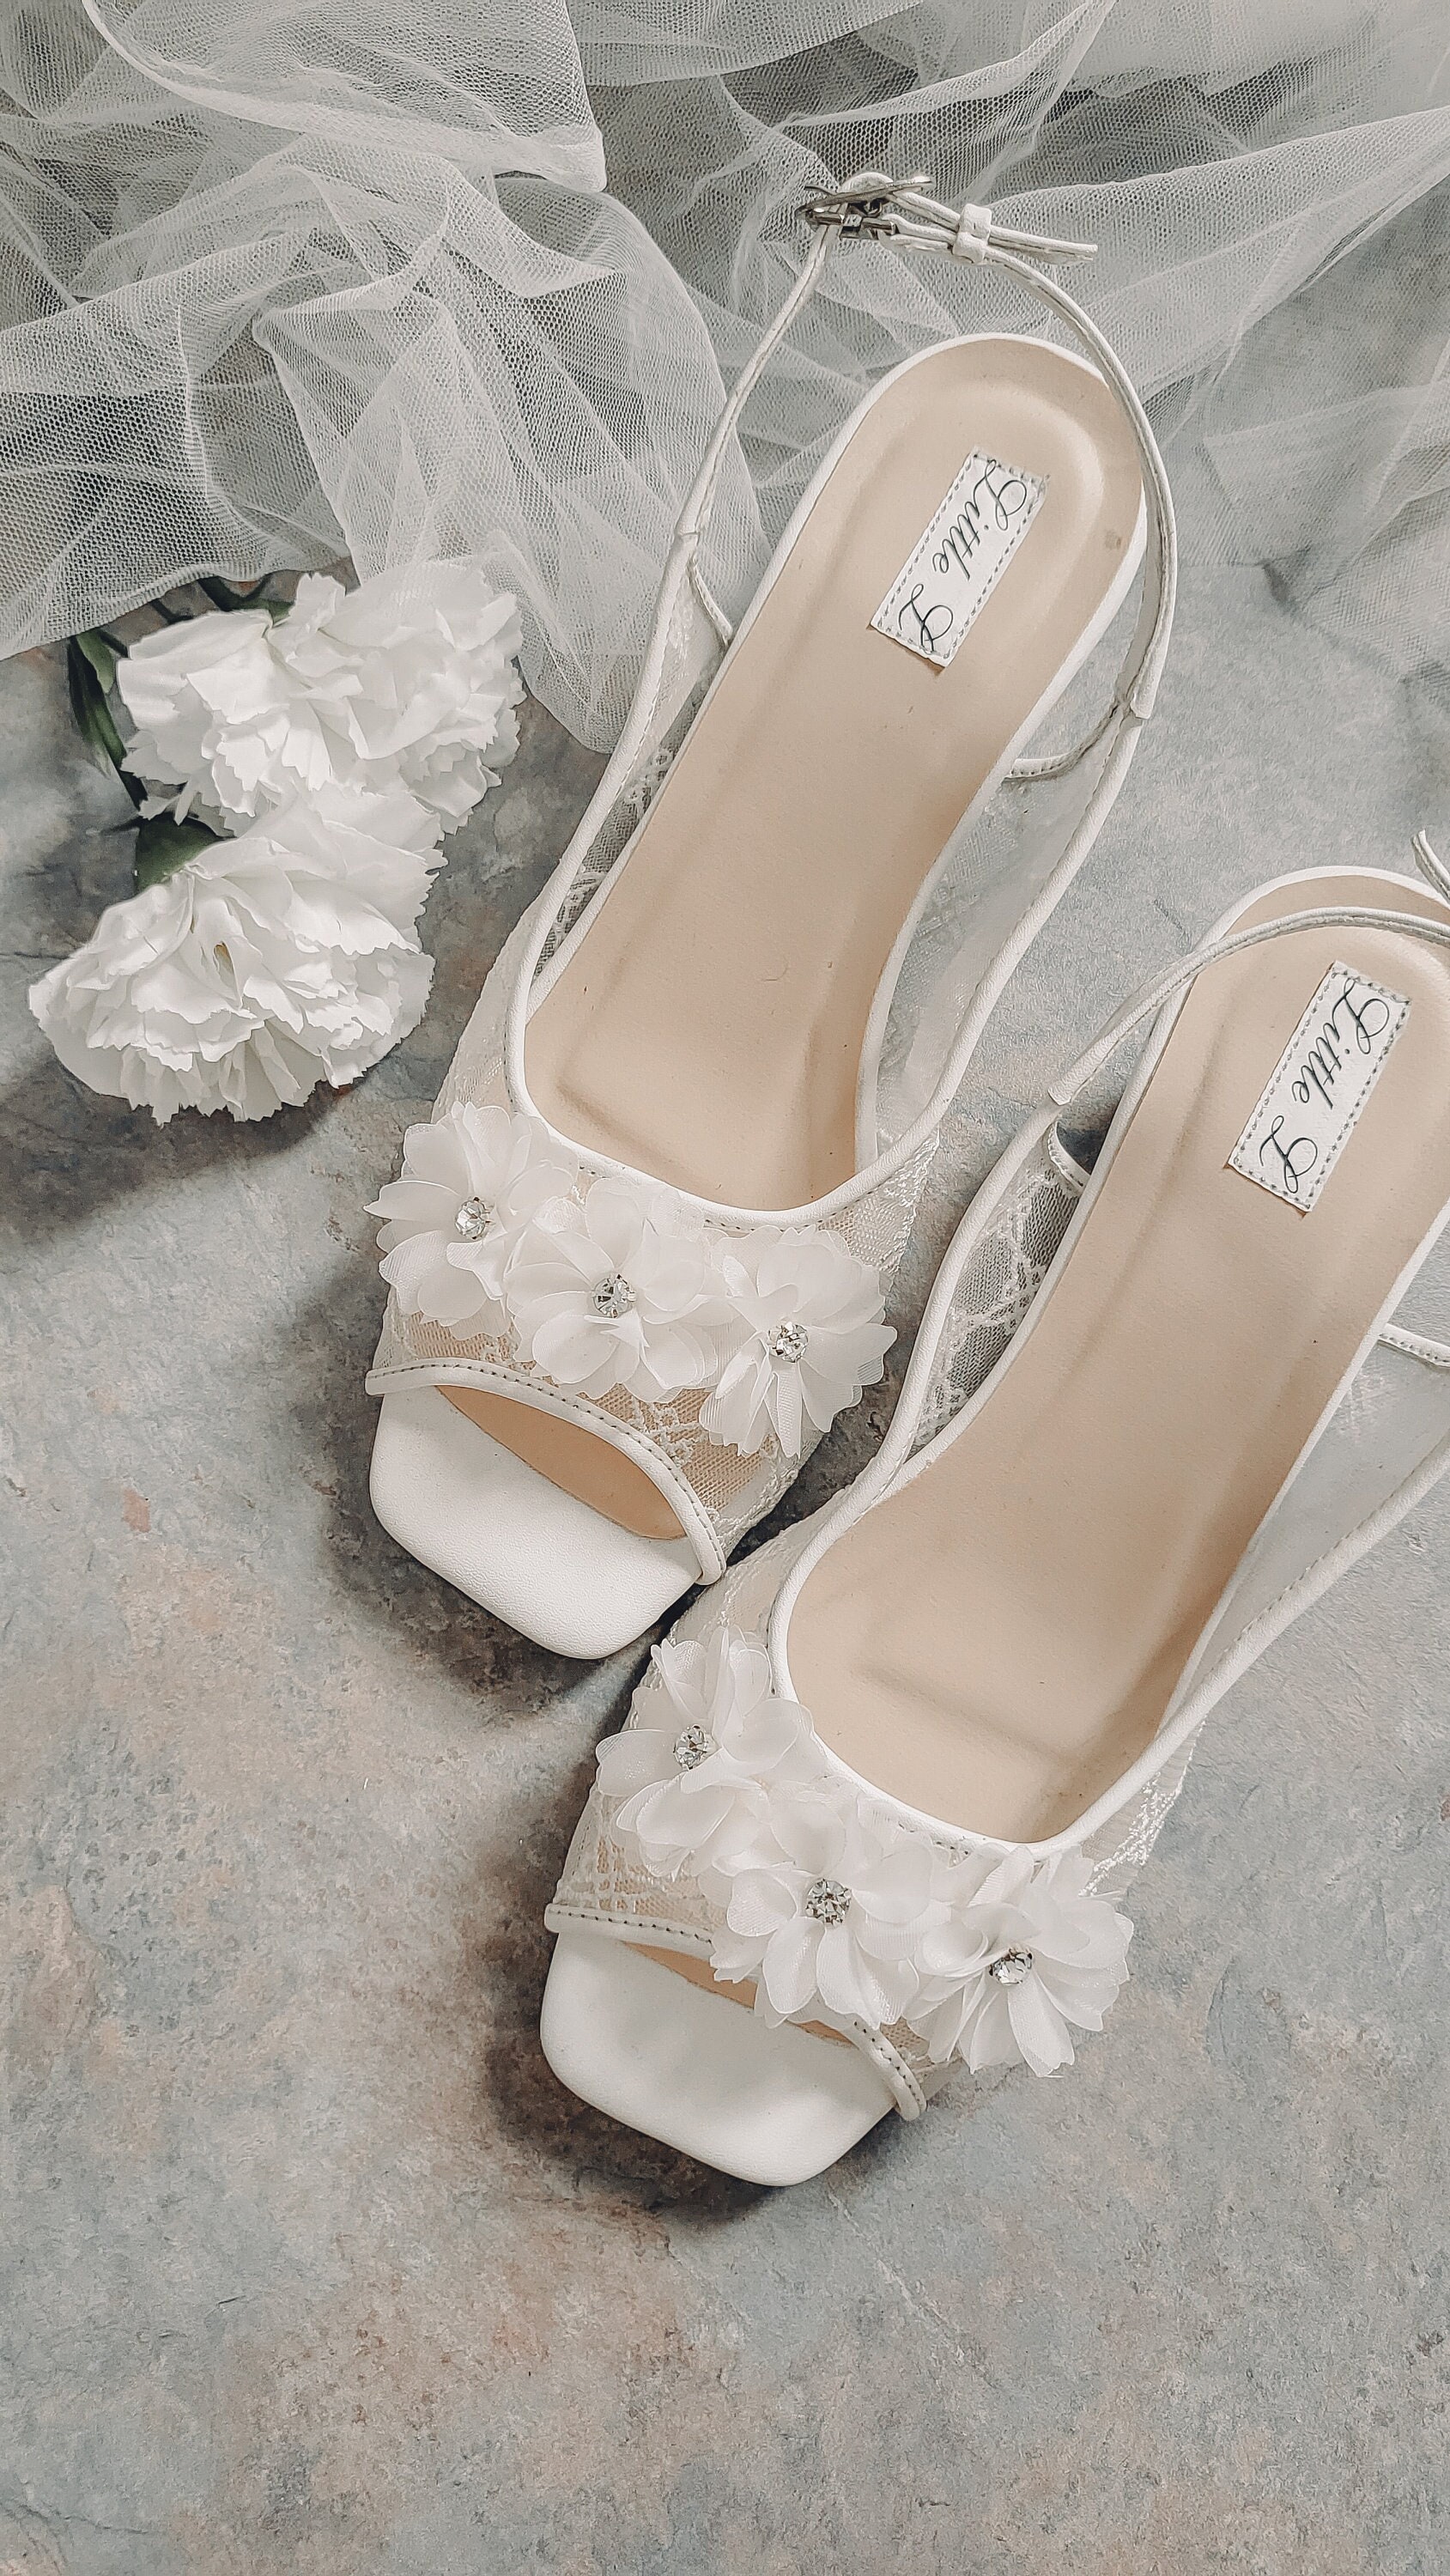 Wedding pearl heels. Original sweetpearl heels custom made by lepapillon Shoes Womens Shoes Sandals Gladiator & Strappy Sandals 